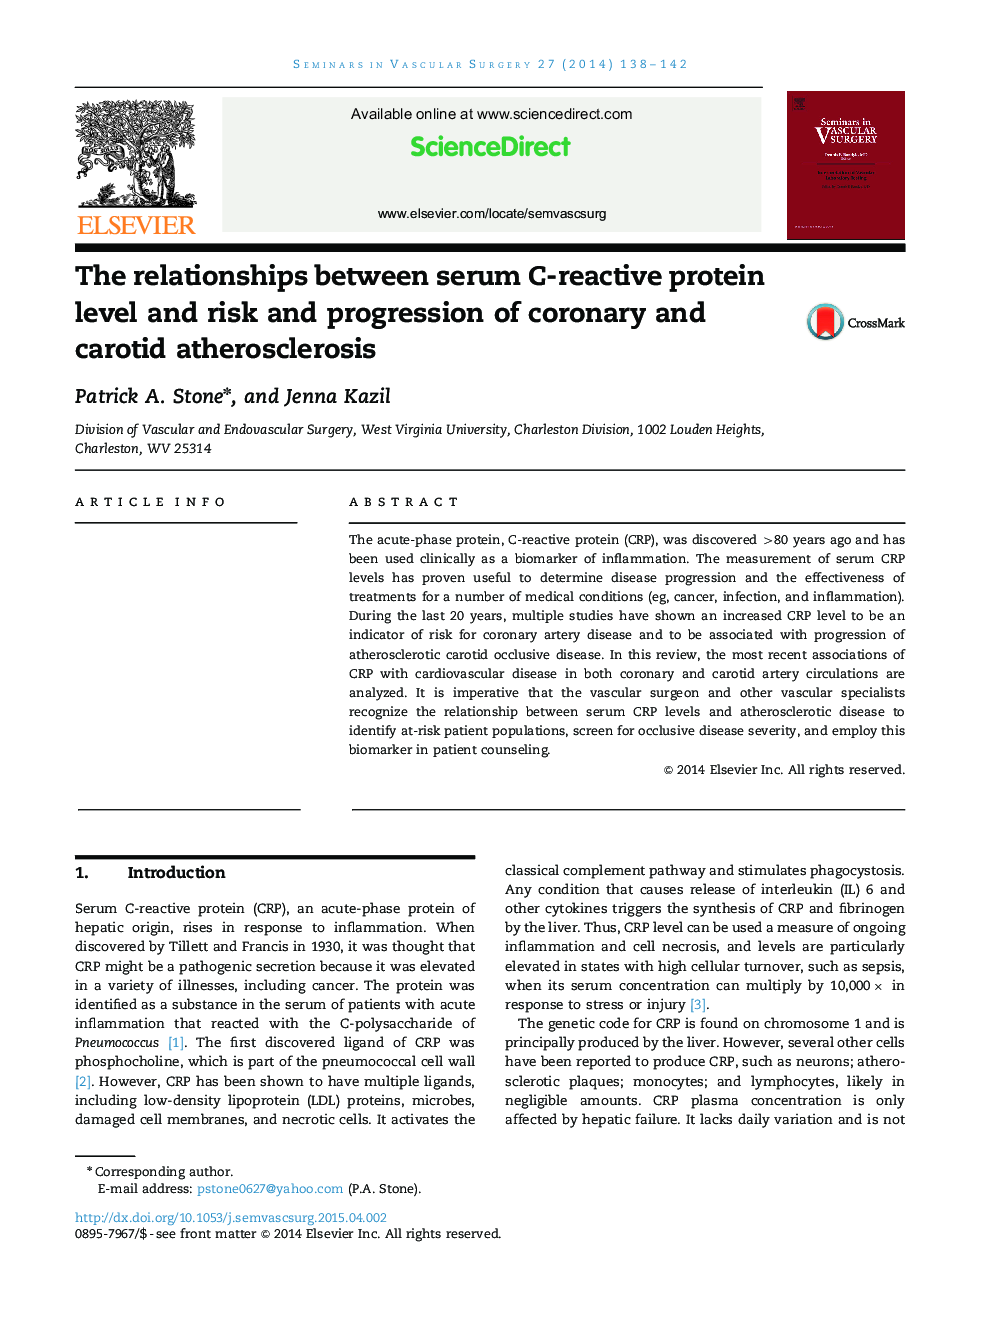 The relationships between serum C-reactive protein level and risk and progression of coronary and carotid atherosclerosis